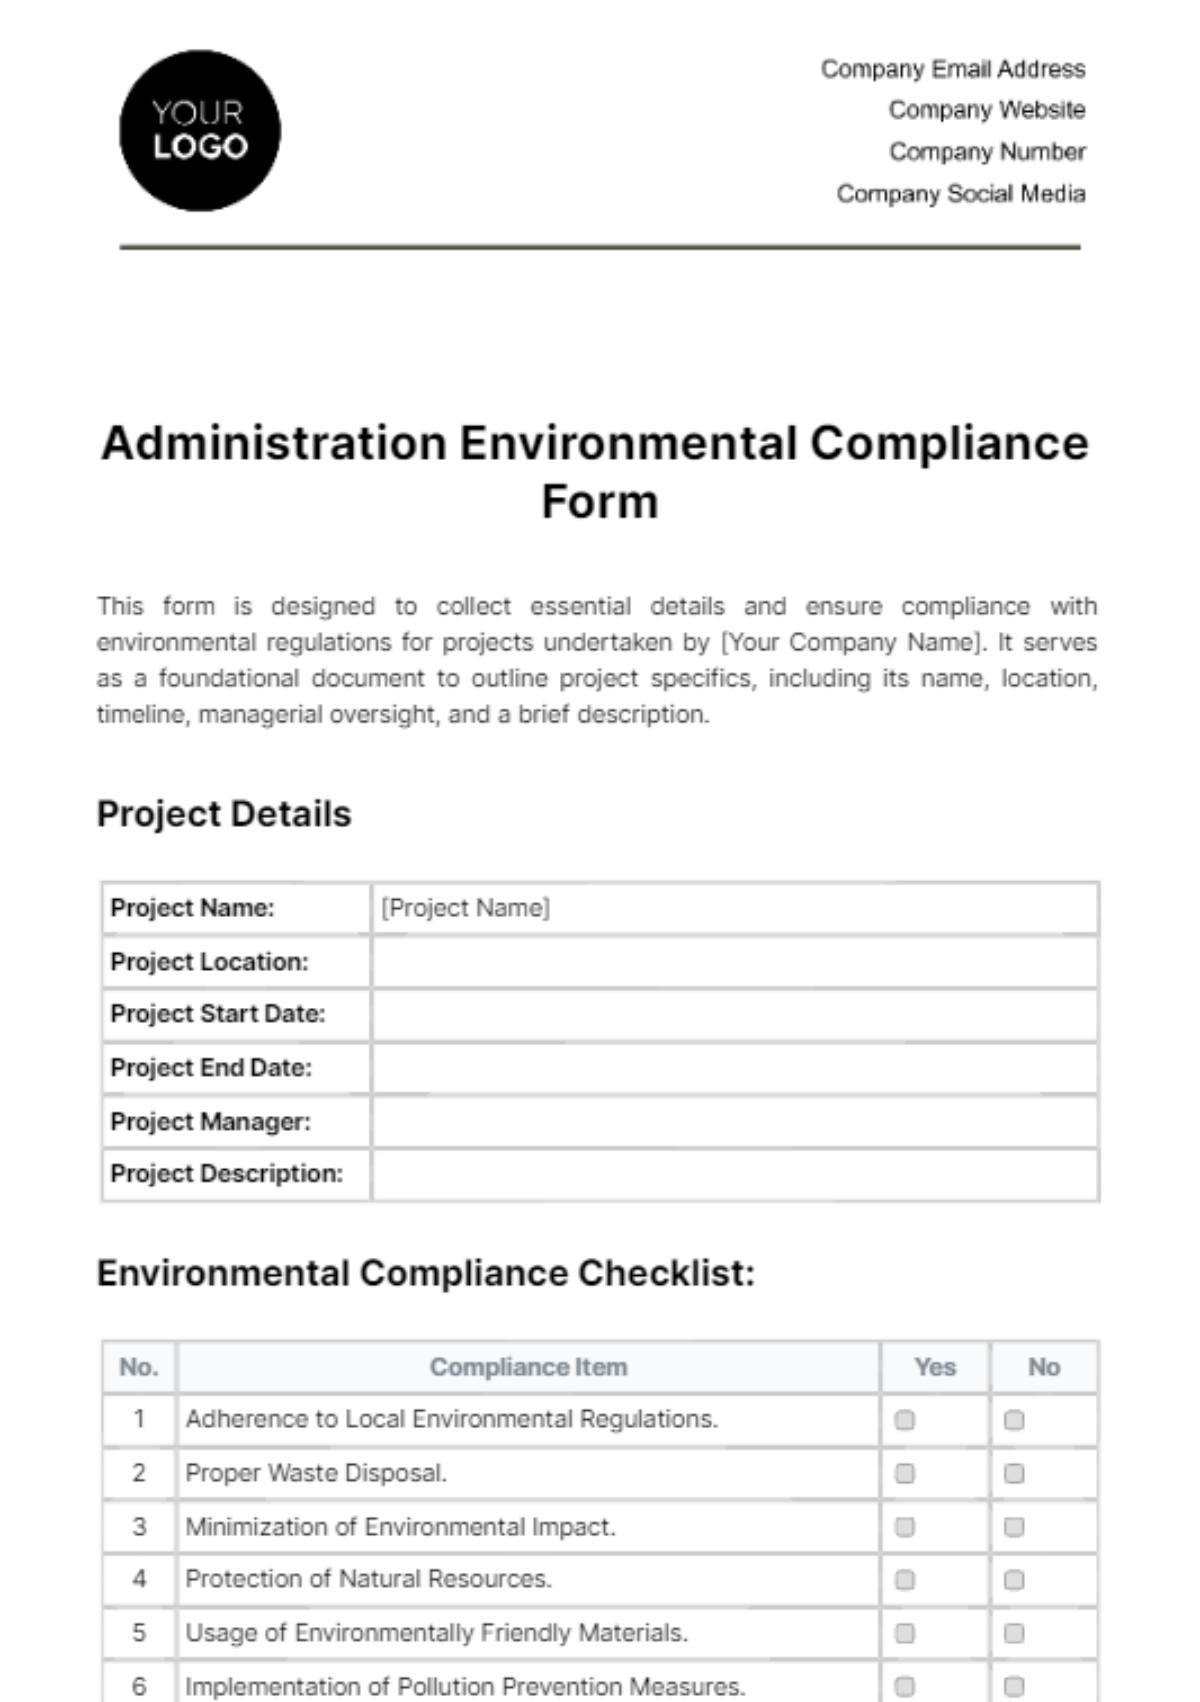 Administration Environmental Compliance Form Template